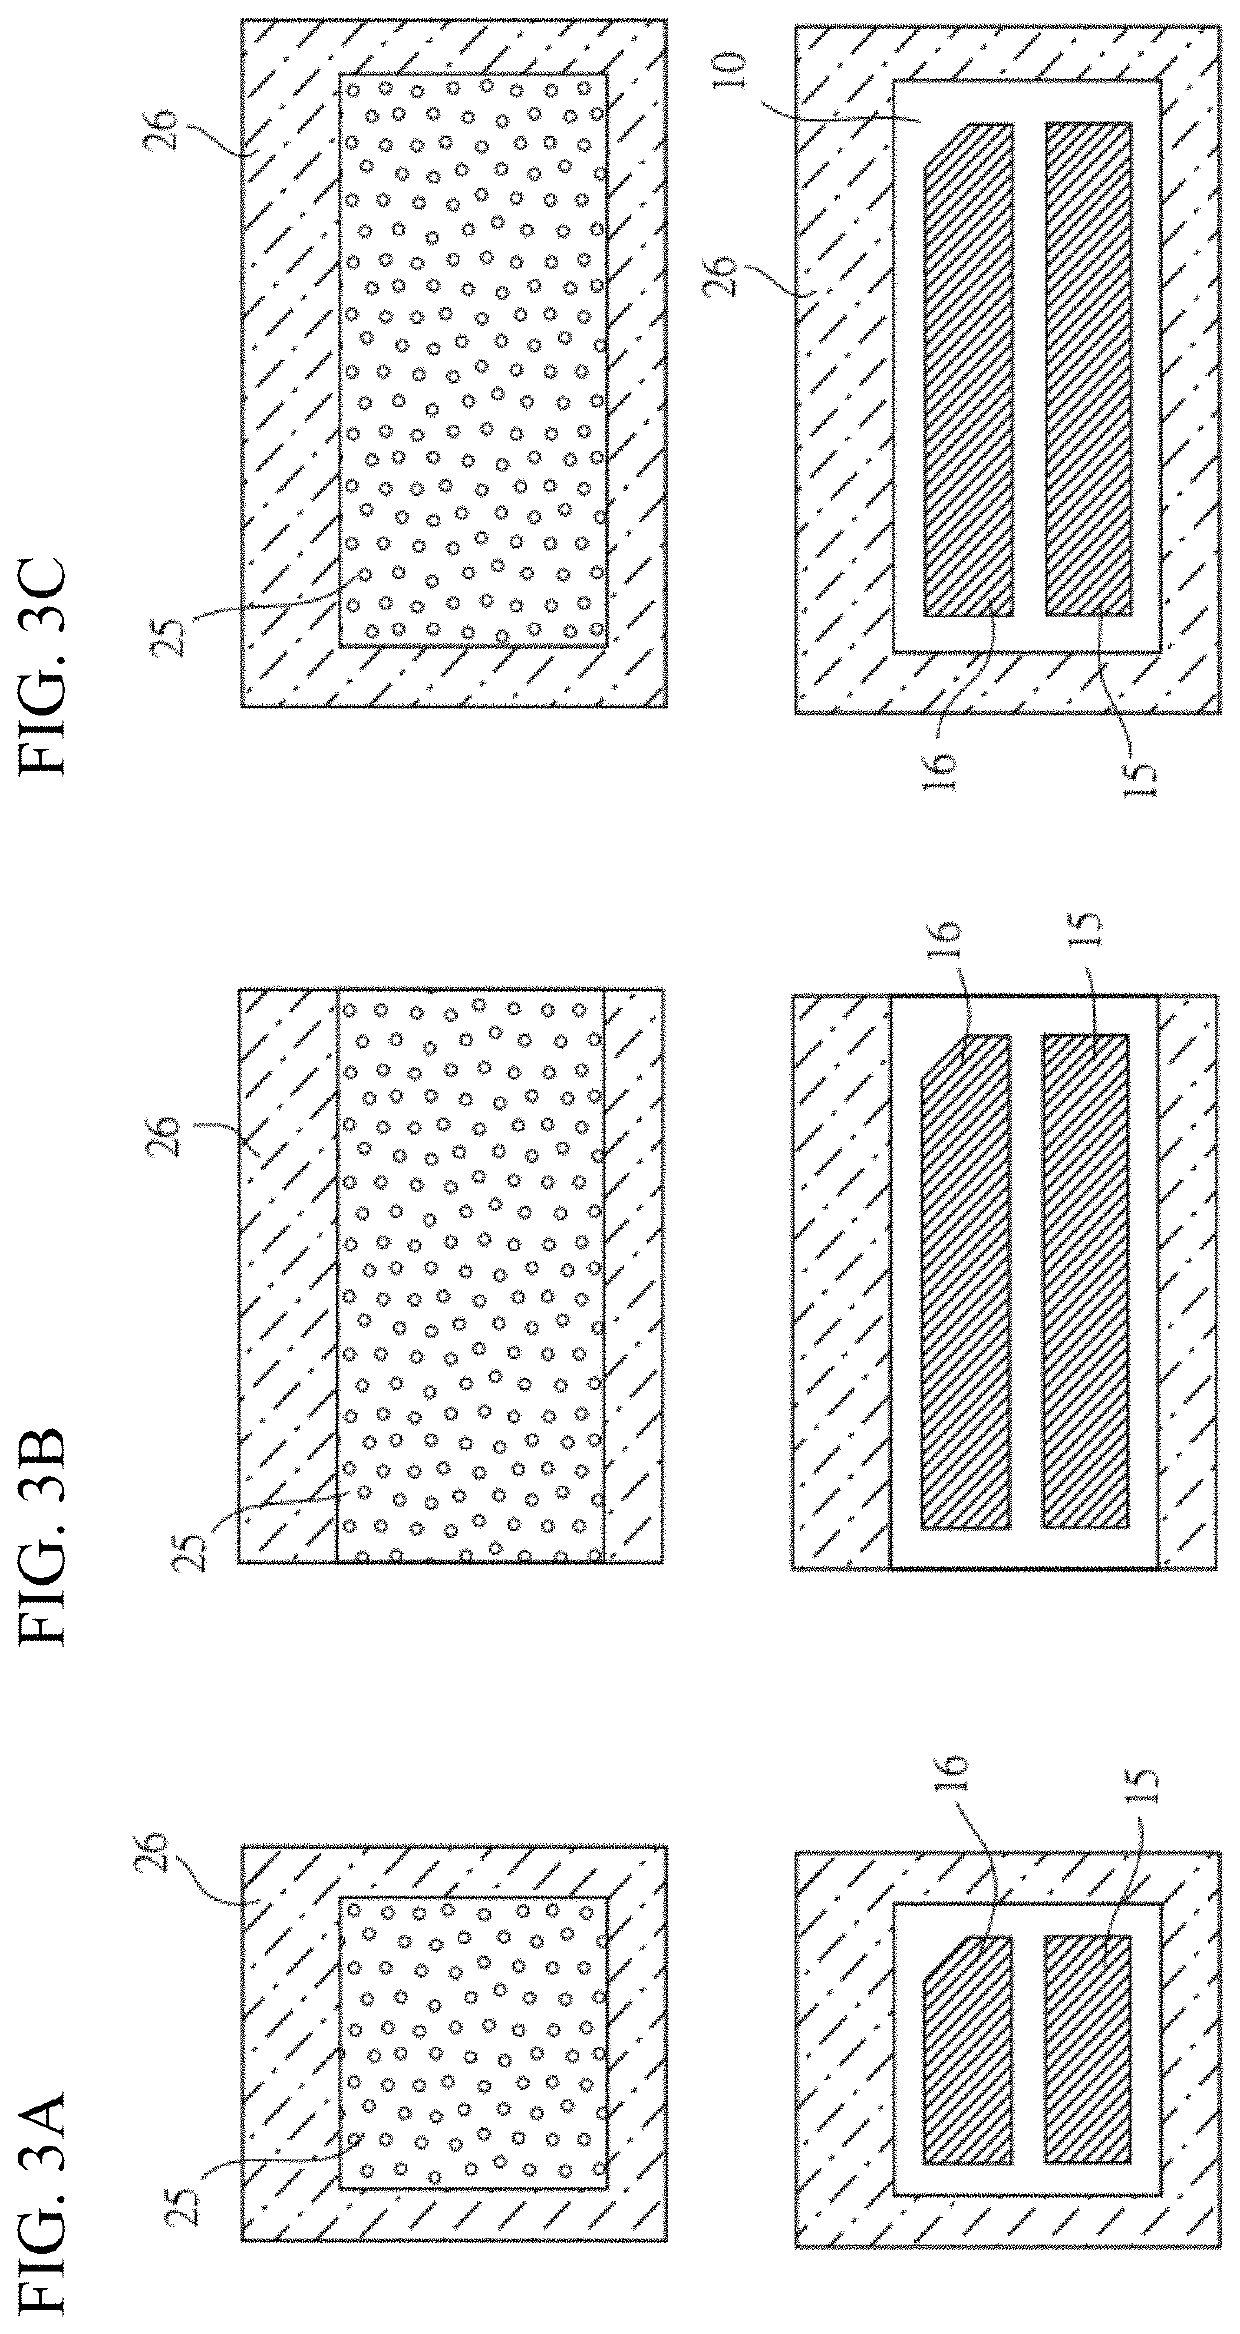 Chip-scale packaging light-emitting device with electrode polarity identifier and method of manufacturing the same